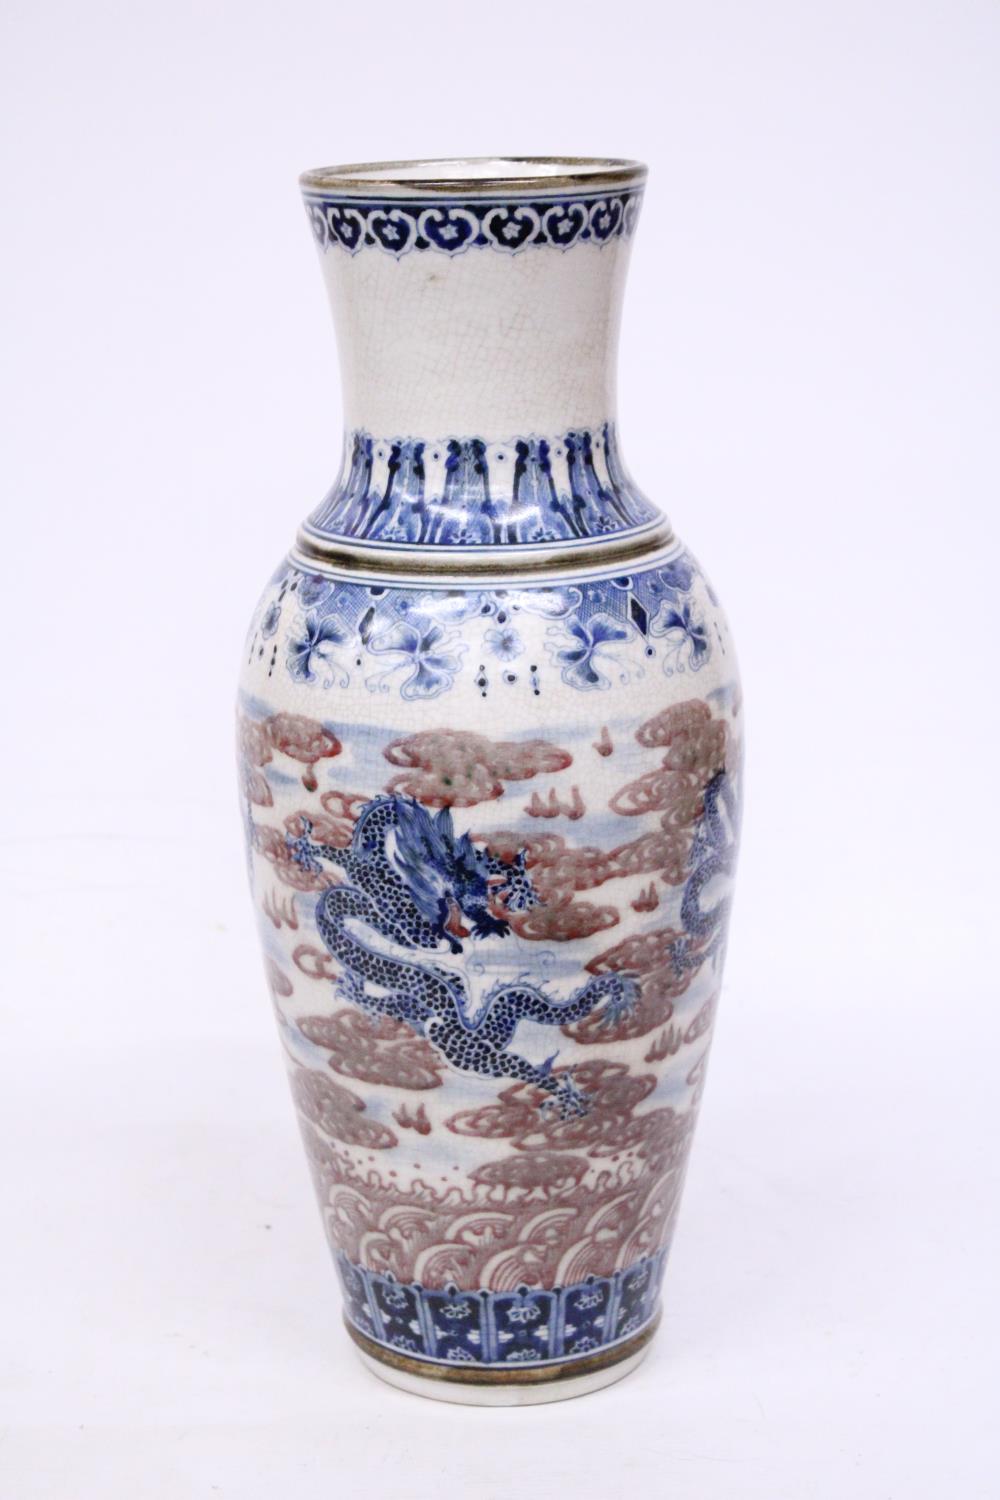 A LARGE PORCELAIN CHINESE GLAZED CRACKLEWARE VASE PORTRAYING DRAGONS WITH CHARACTER MARKS TO THE